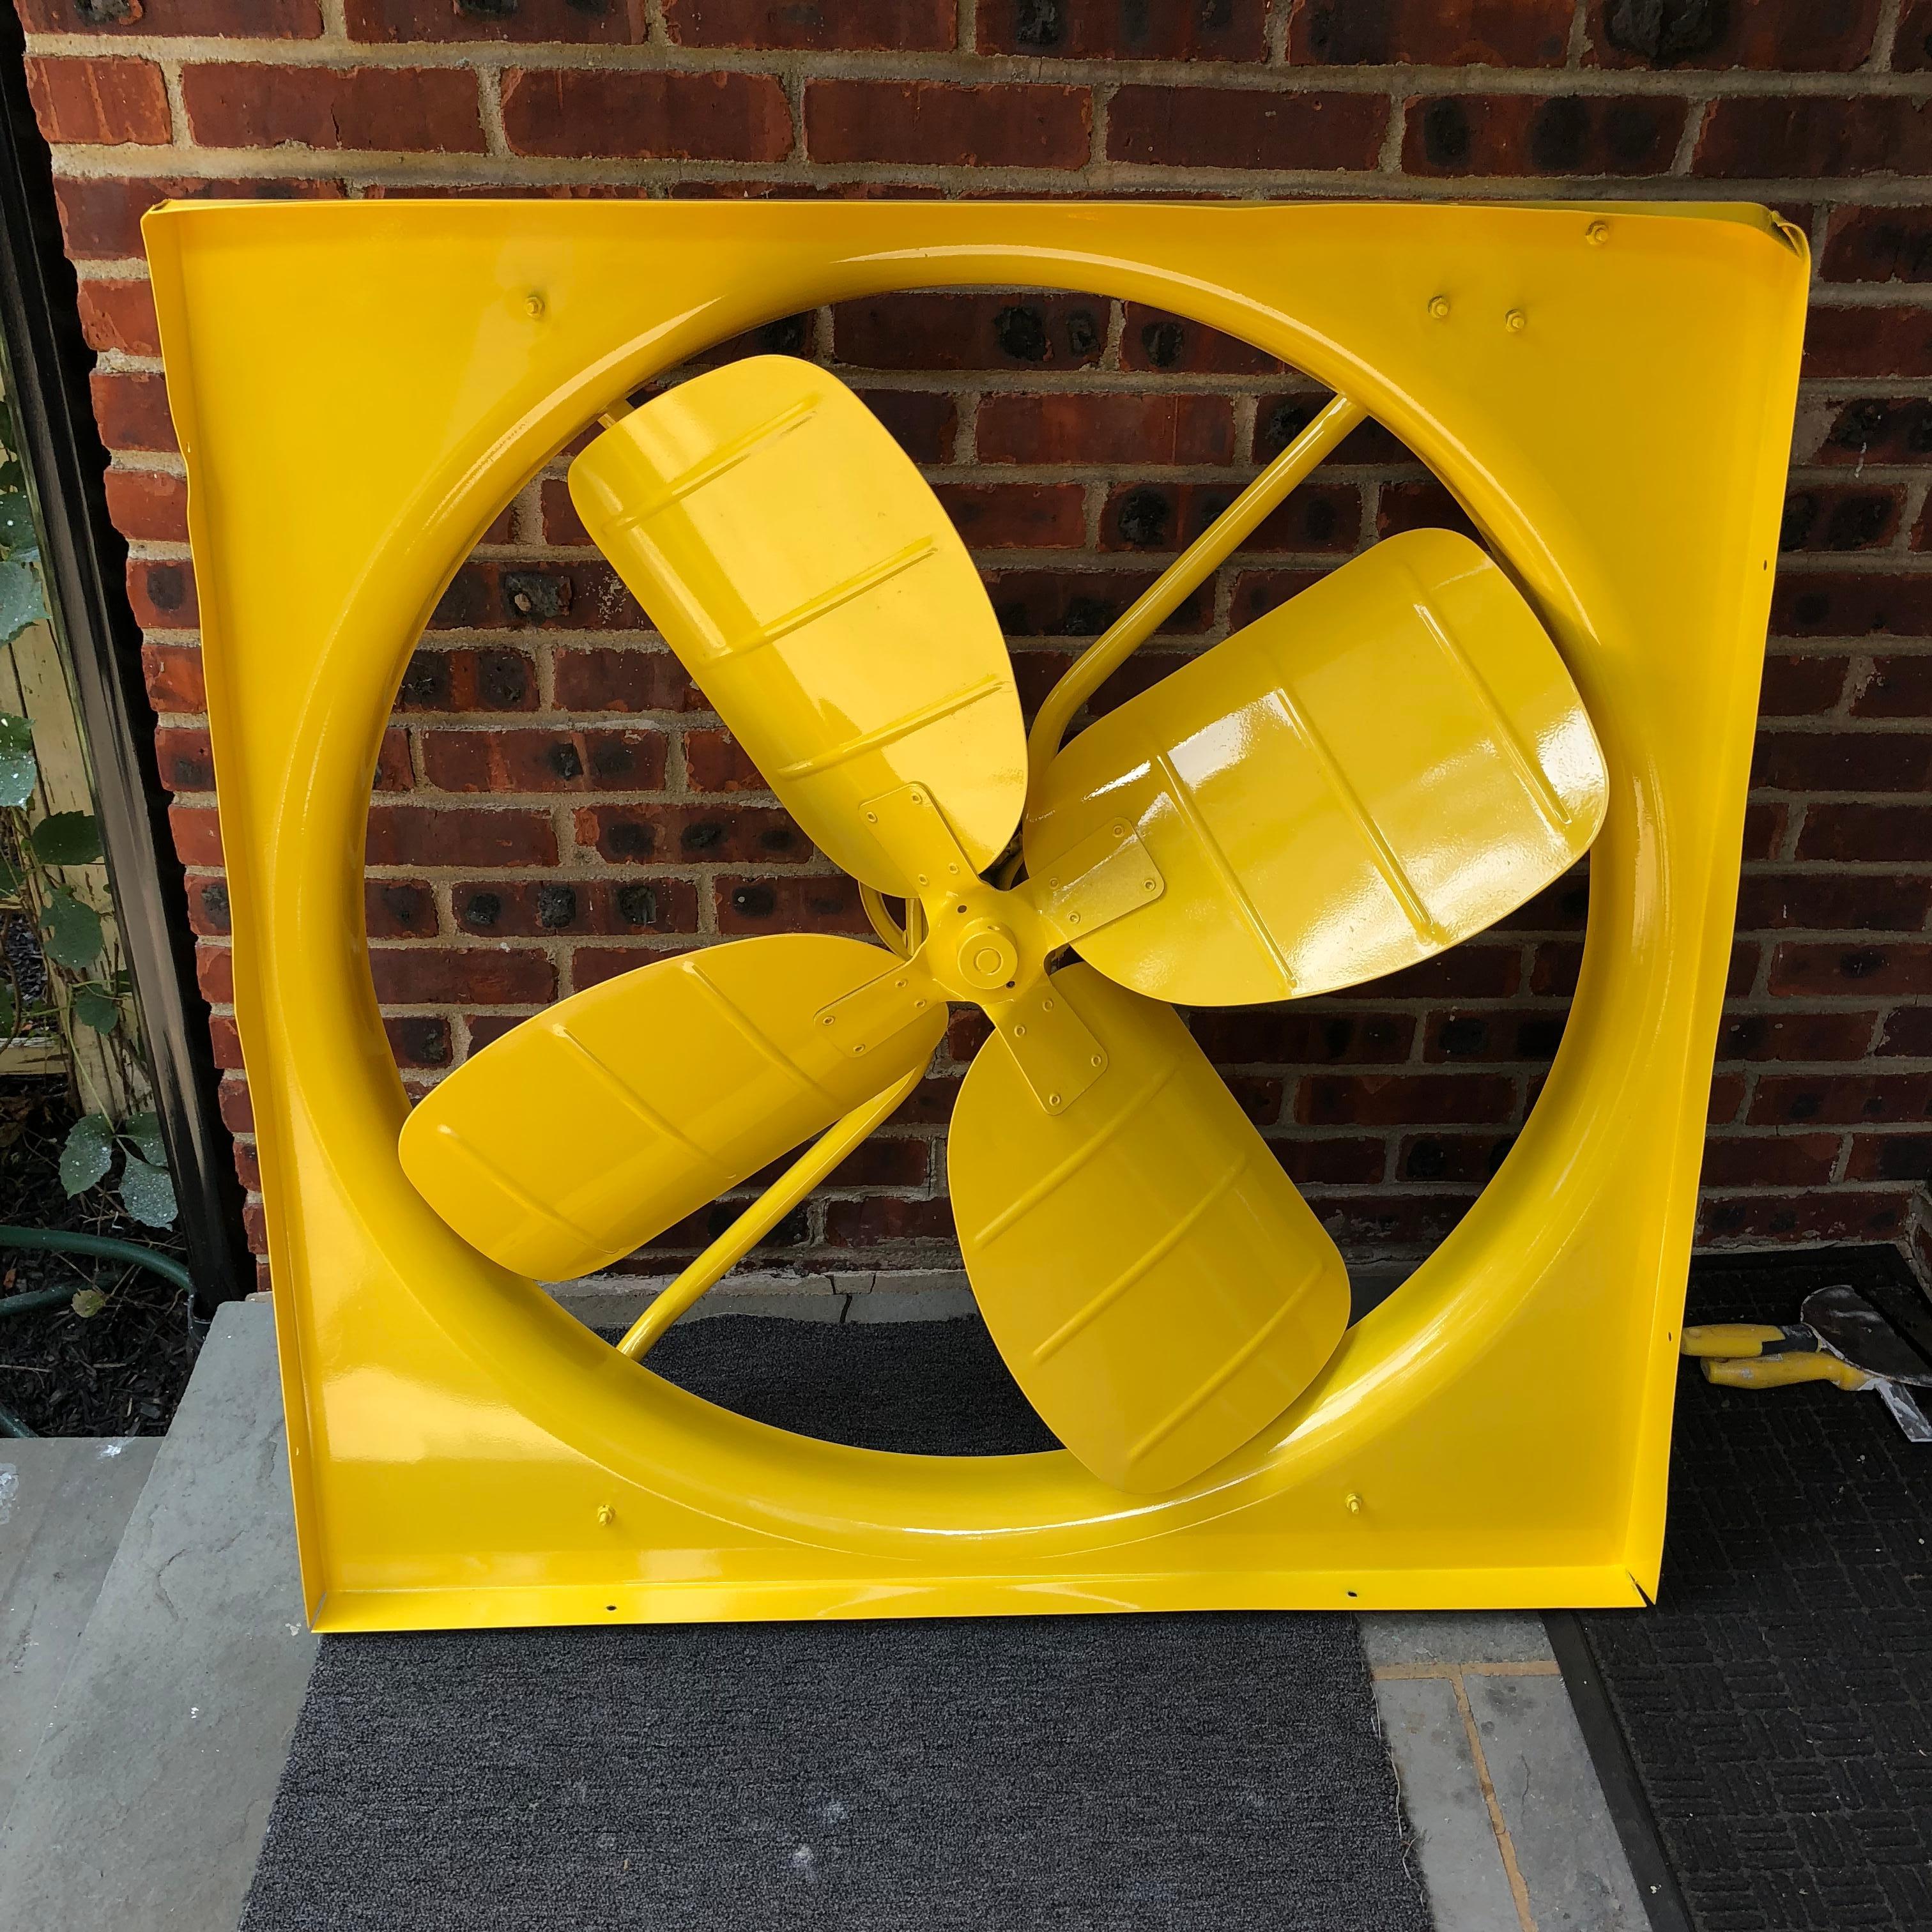 Large sunshine yellow powder-coated industrial fan.

Fan is in working spinning condition and is newly powder-coated.

$125 flat rate front door delivery includes Washington DC metro, Baltimore and Philadelphia.
 